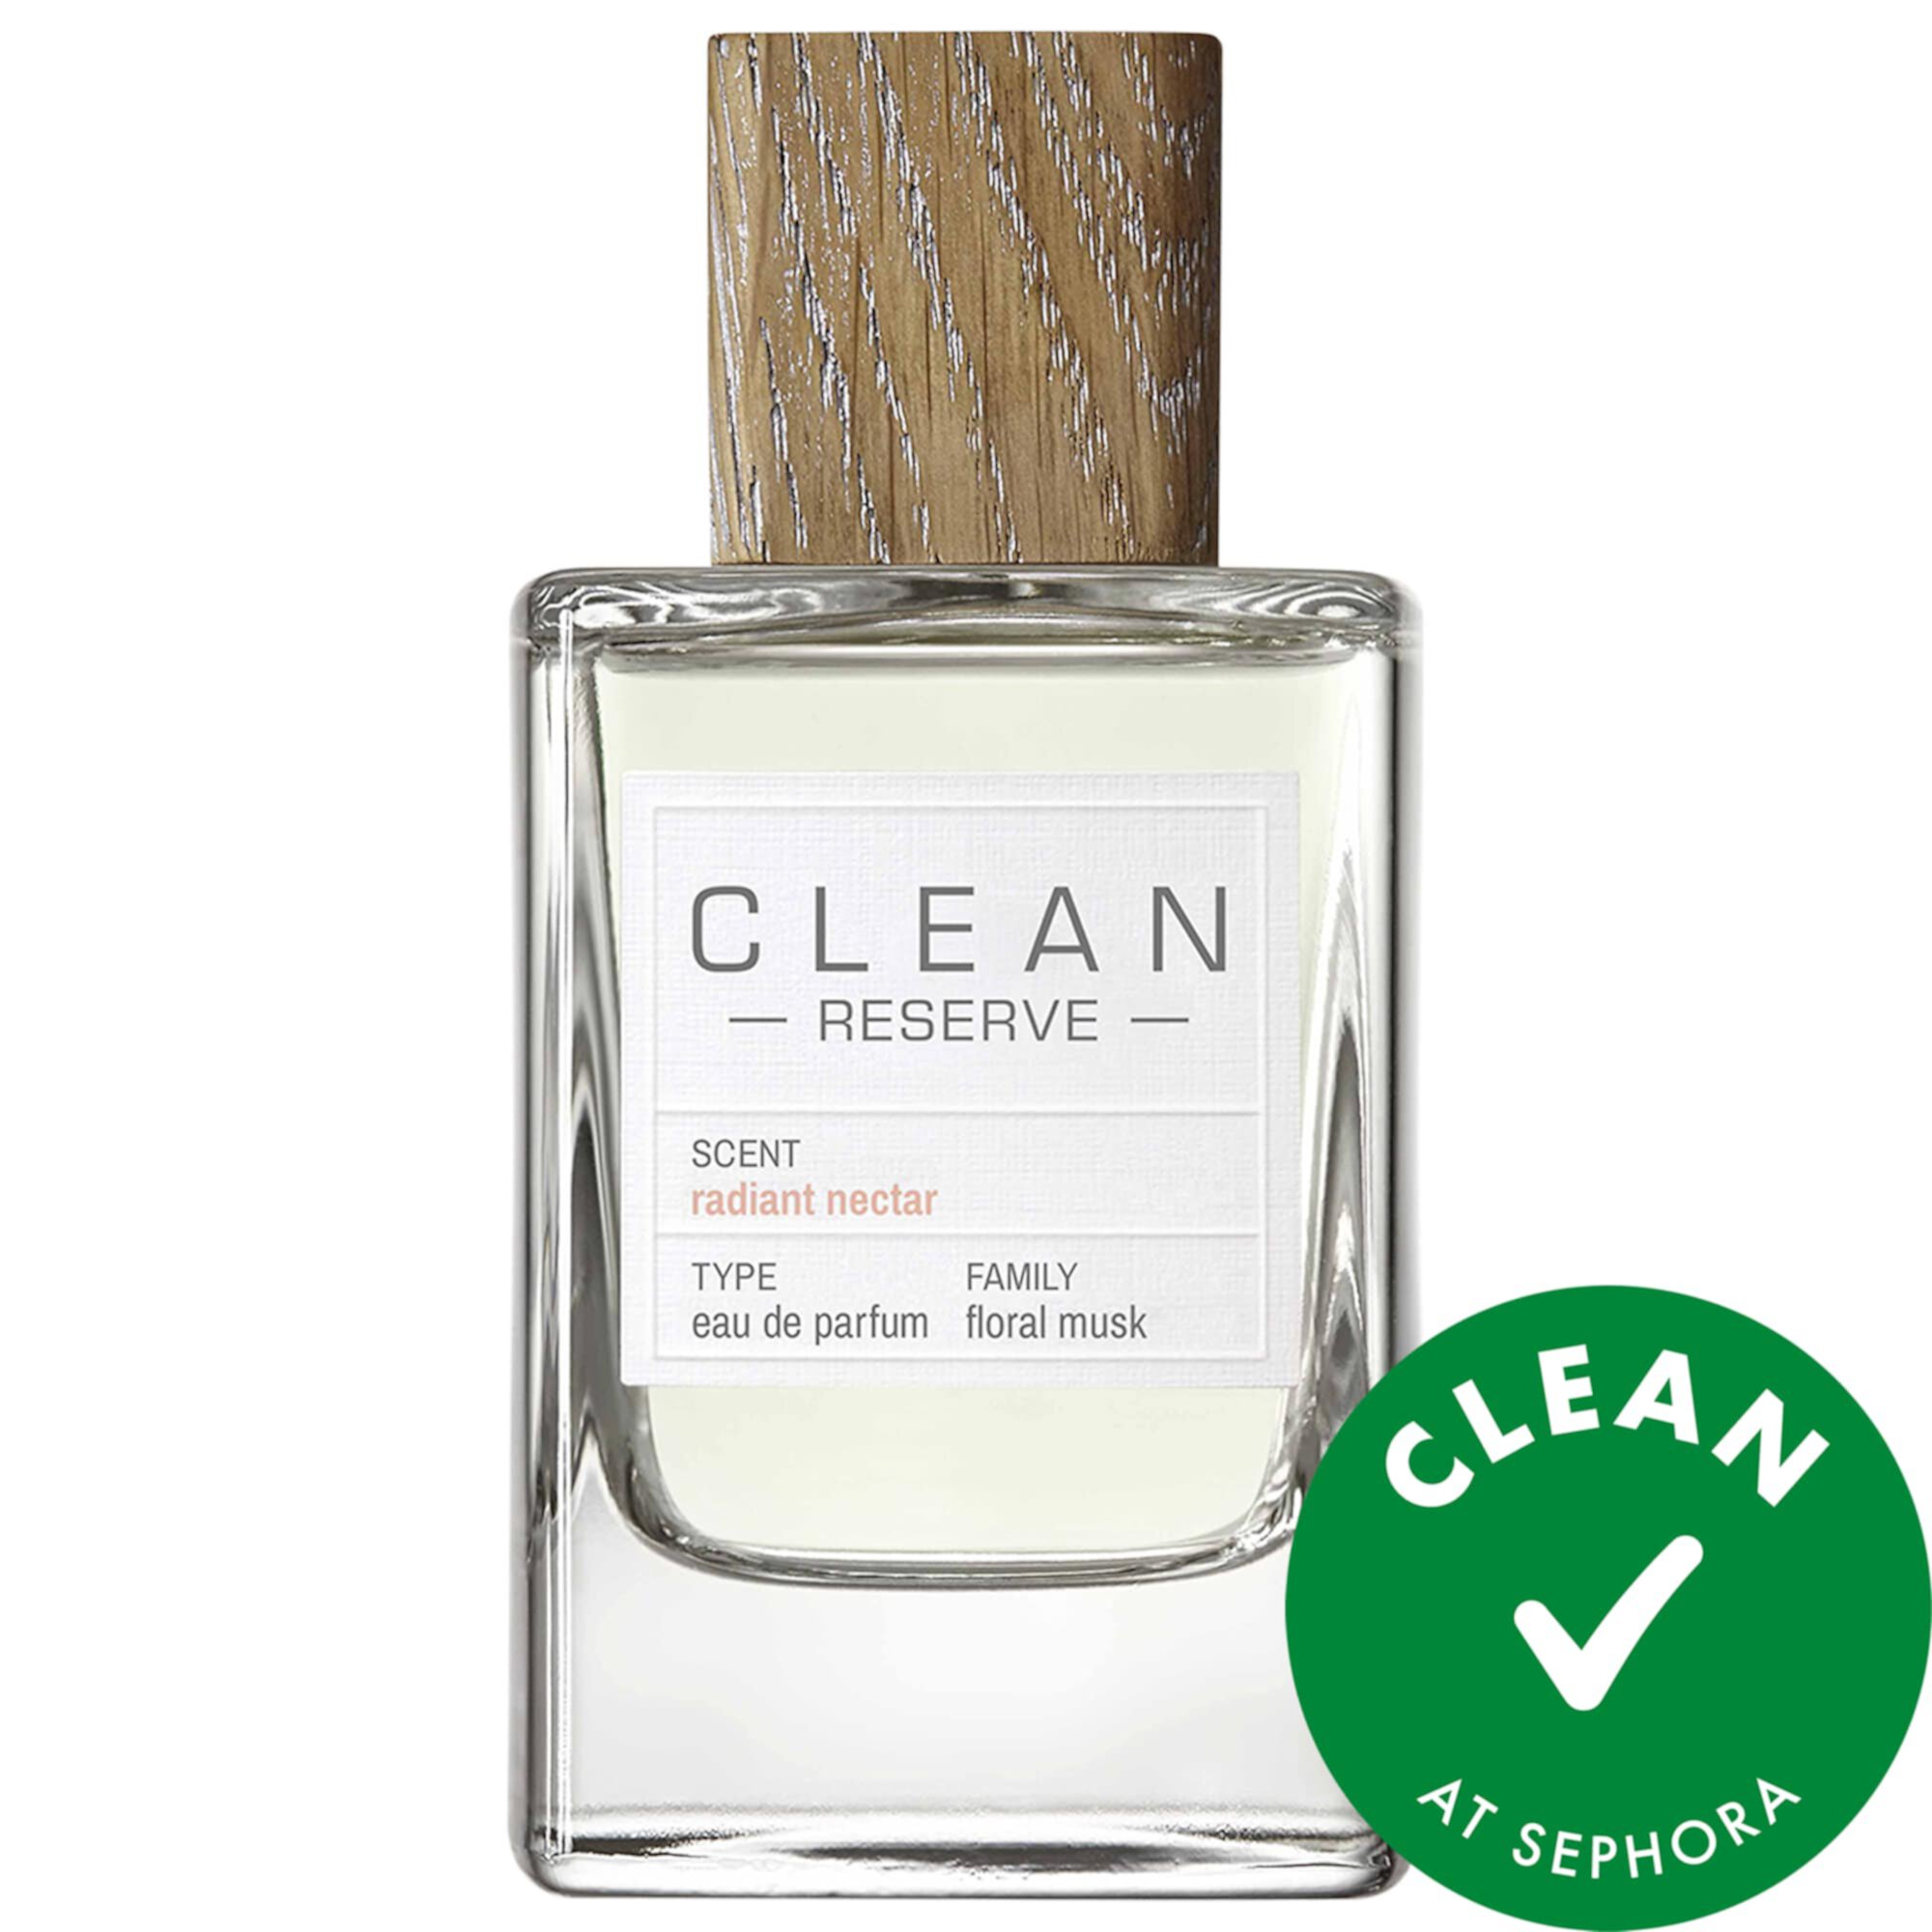 Reserve - Radiant Nectar CLEAN RESERVE